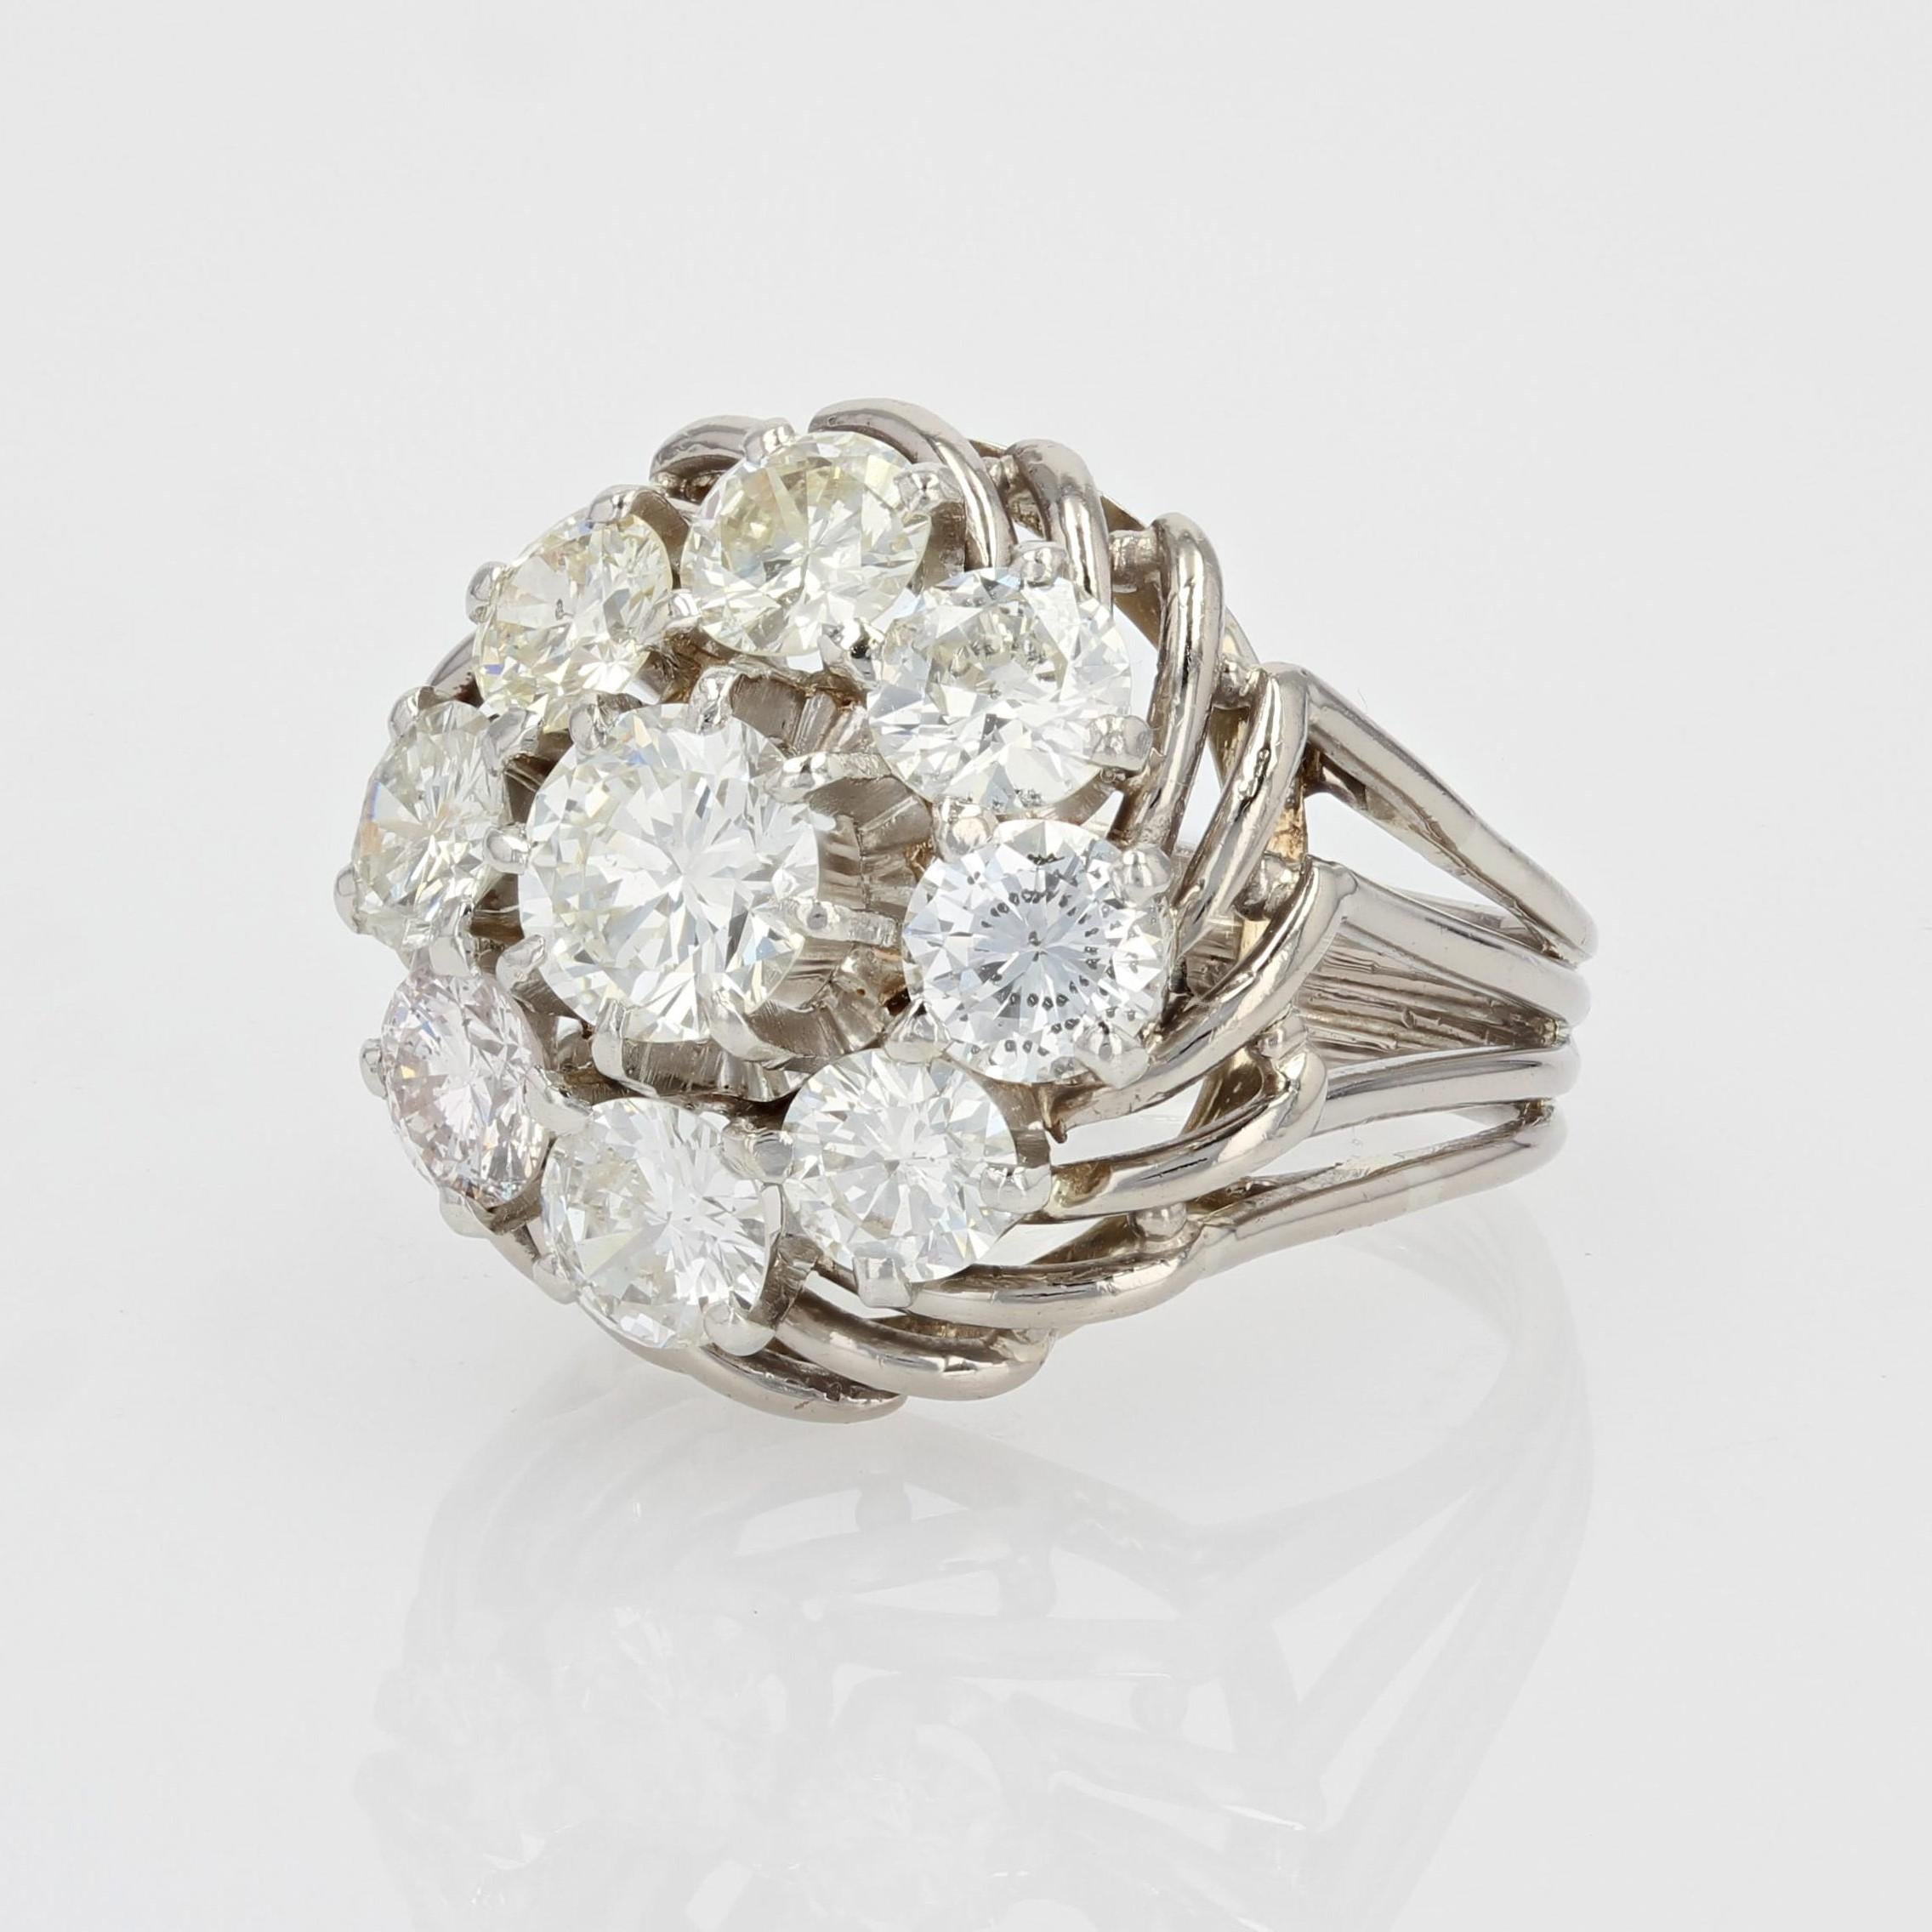 French, 1950s Diamonds 18 Karat White Gold Platinum Wire Daisy Ring For Sale 2